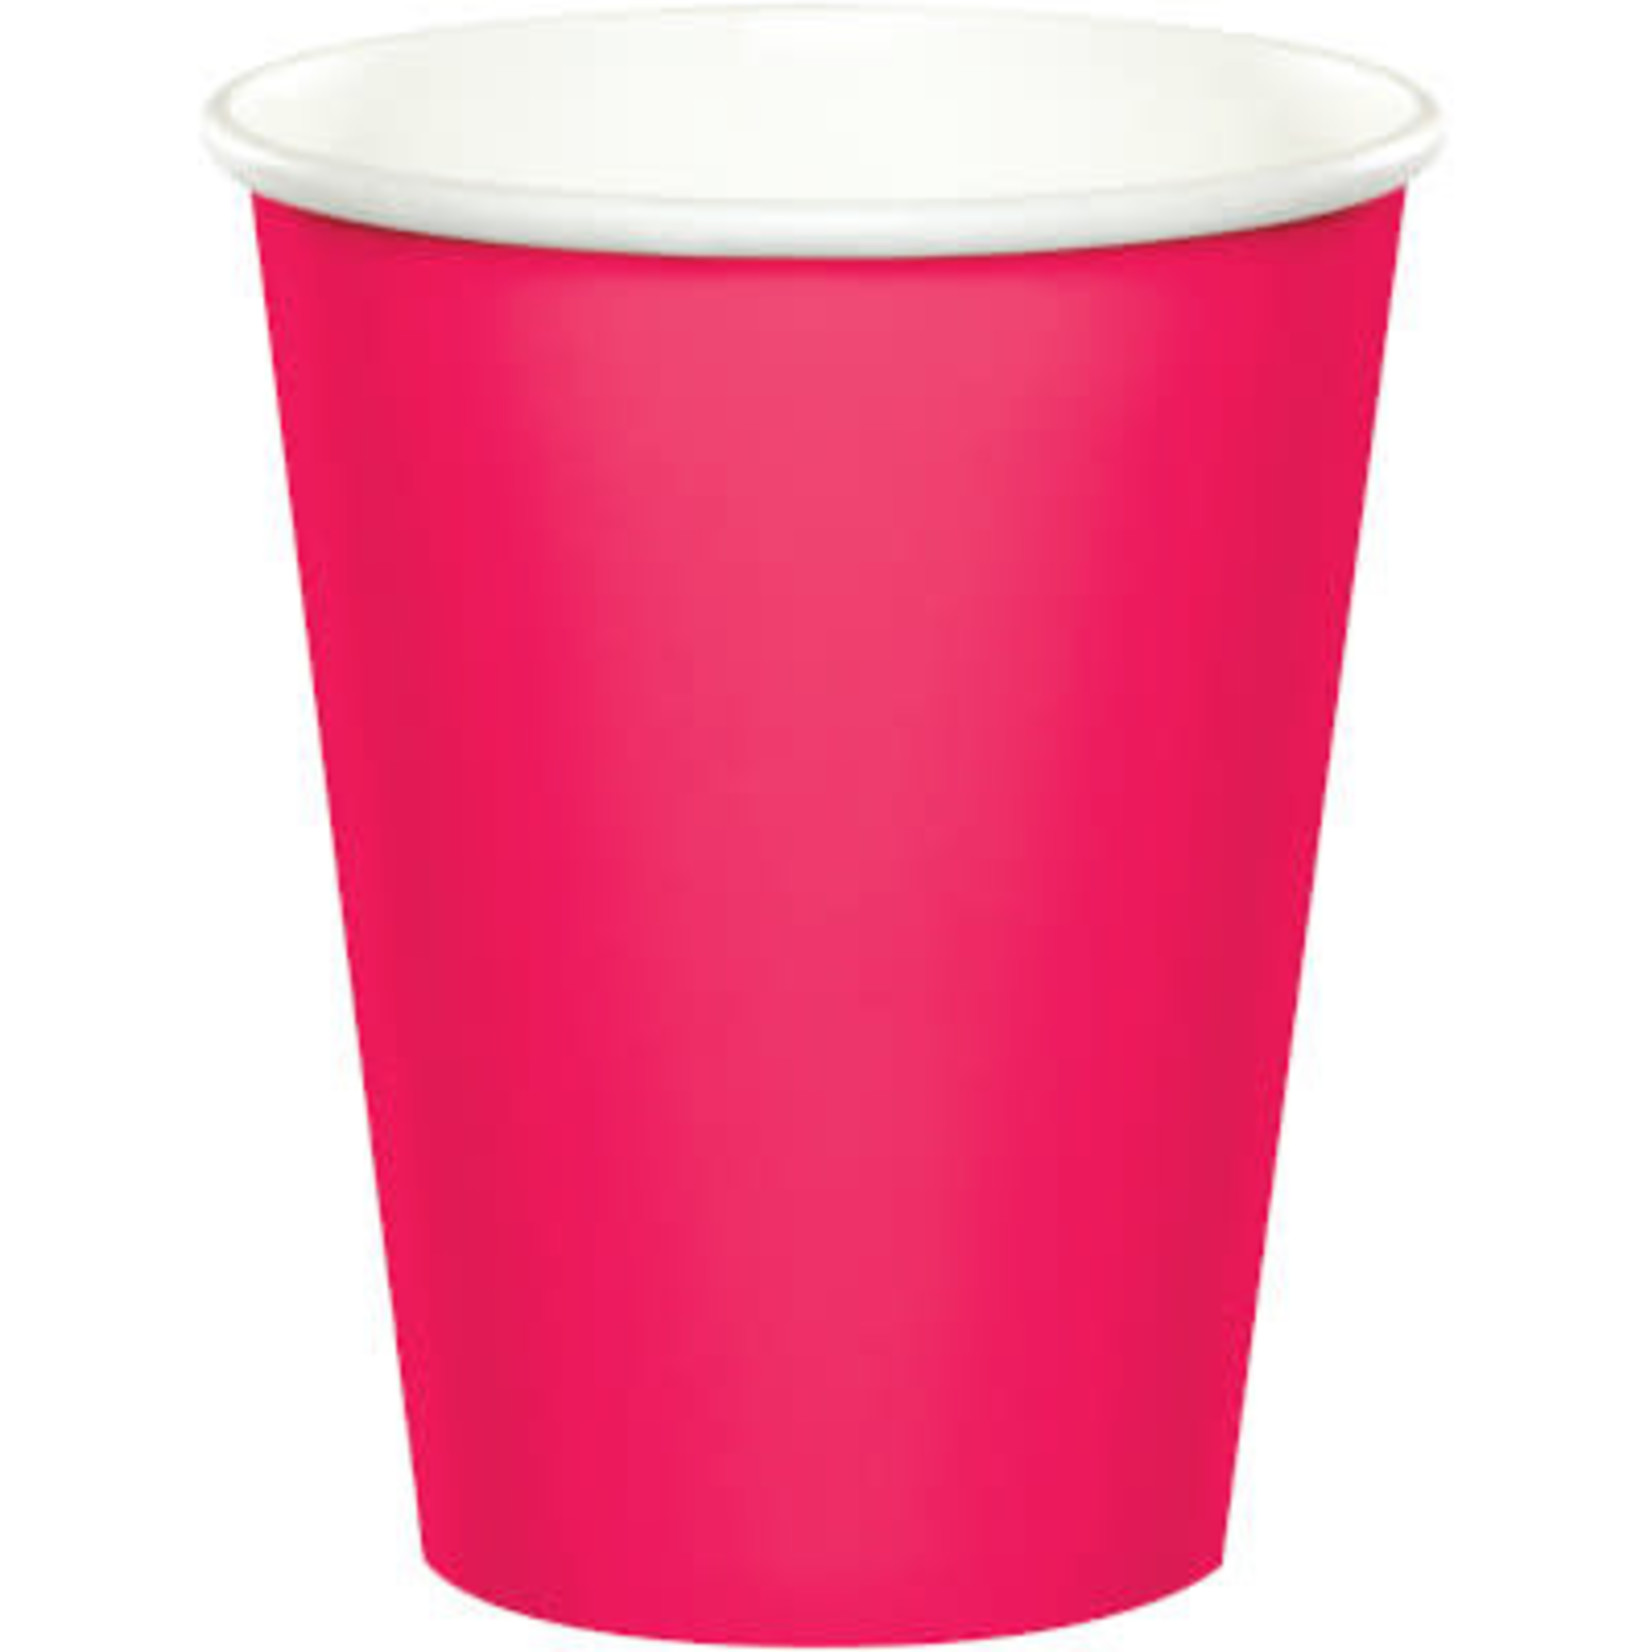 https://cdn.shoplightspeed.com/shops/638201/files/27462699/1652x1652x2/touch-of-color-9oz-magenta-pink-hot-cold-paper-cup.jpg